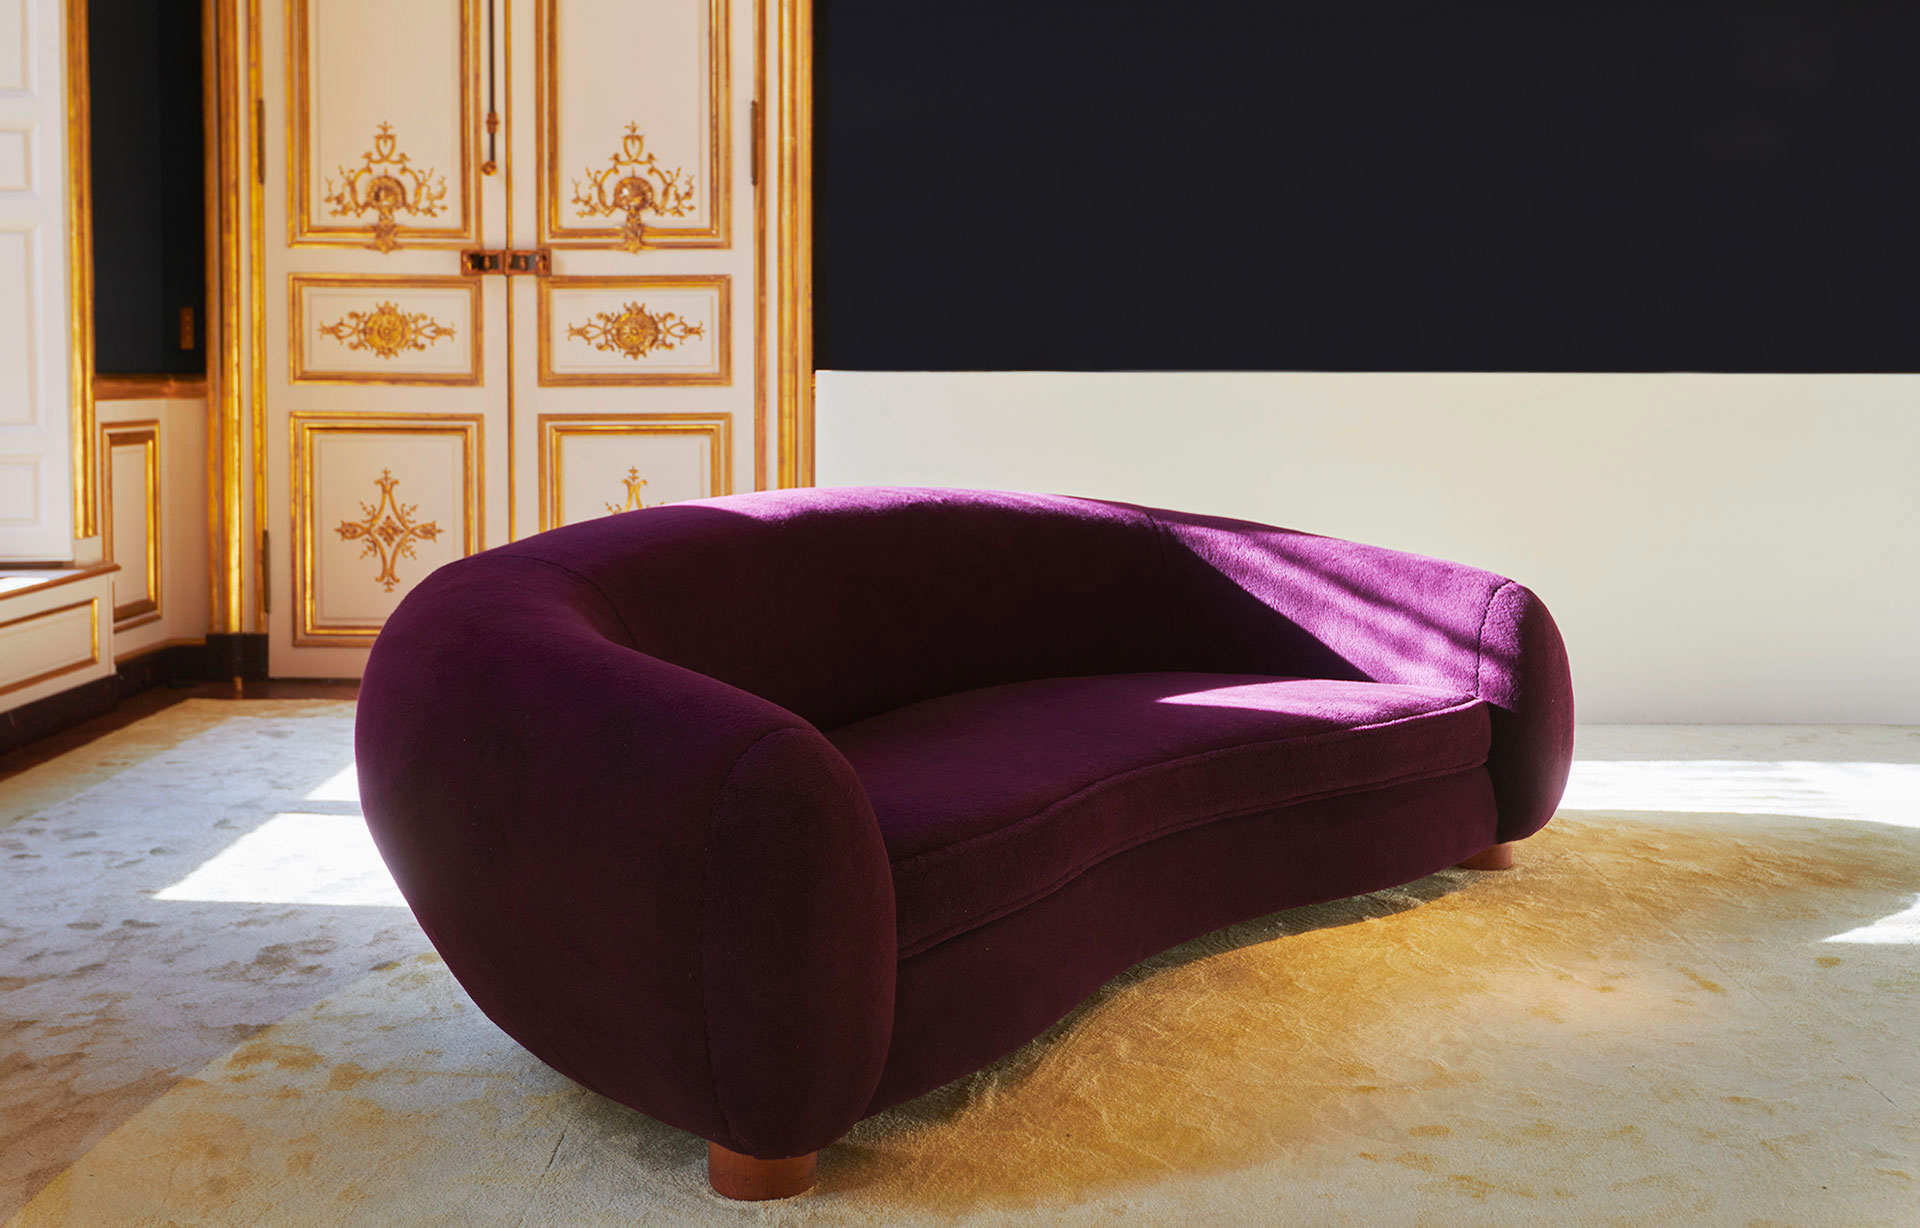 Charlotte Perriand  Iconic Pieces - Laffanour